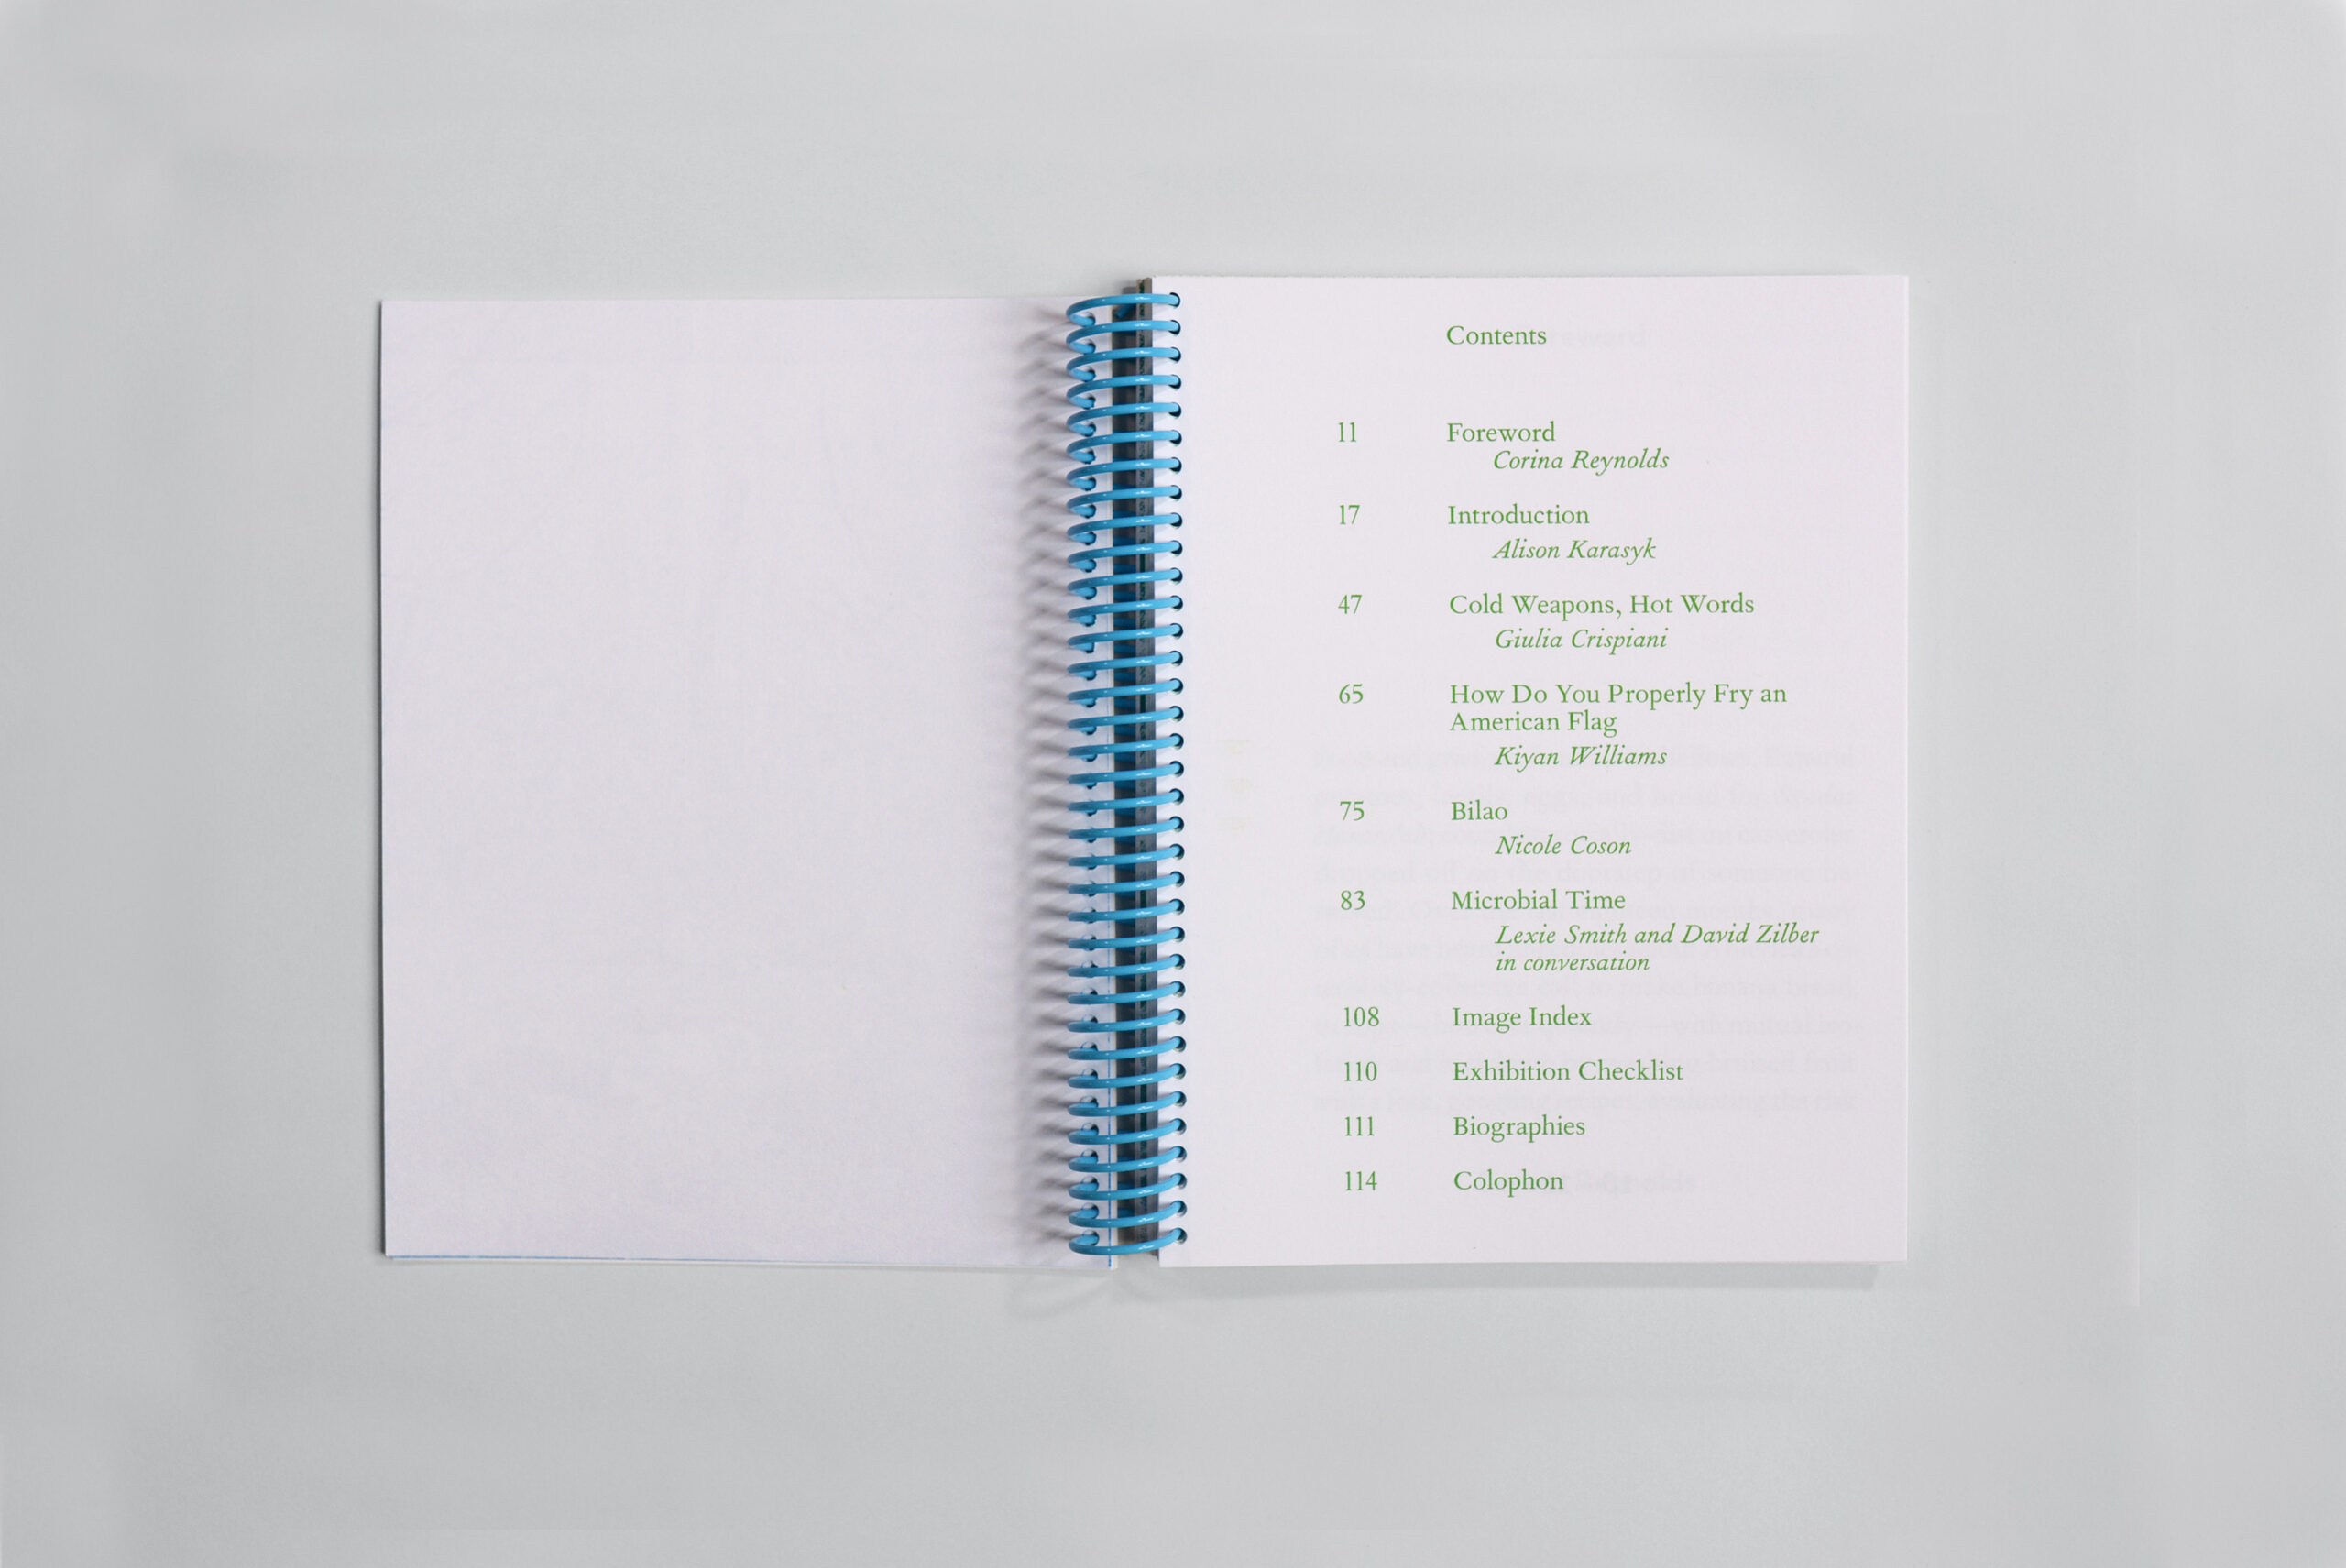 Risograph printed exhibition catalog with green typography on white paper, bound with a blue spiral coil.